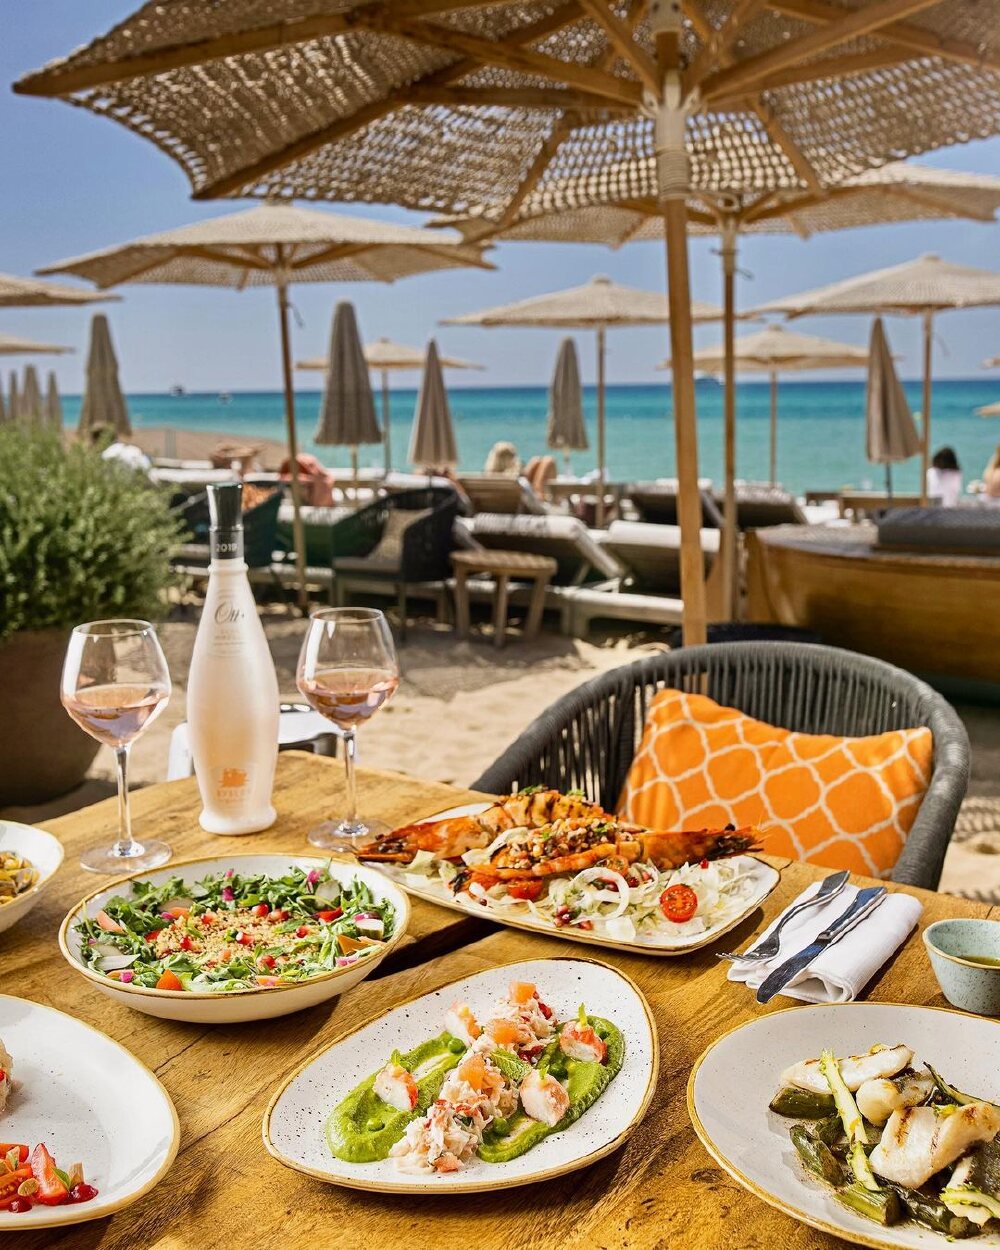 Best Beach Restaurants in Europe – 15 Exquisite Dining Spots with Sea Views